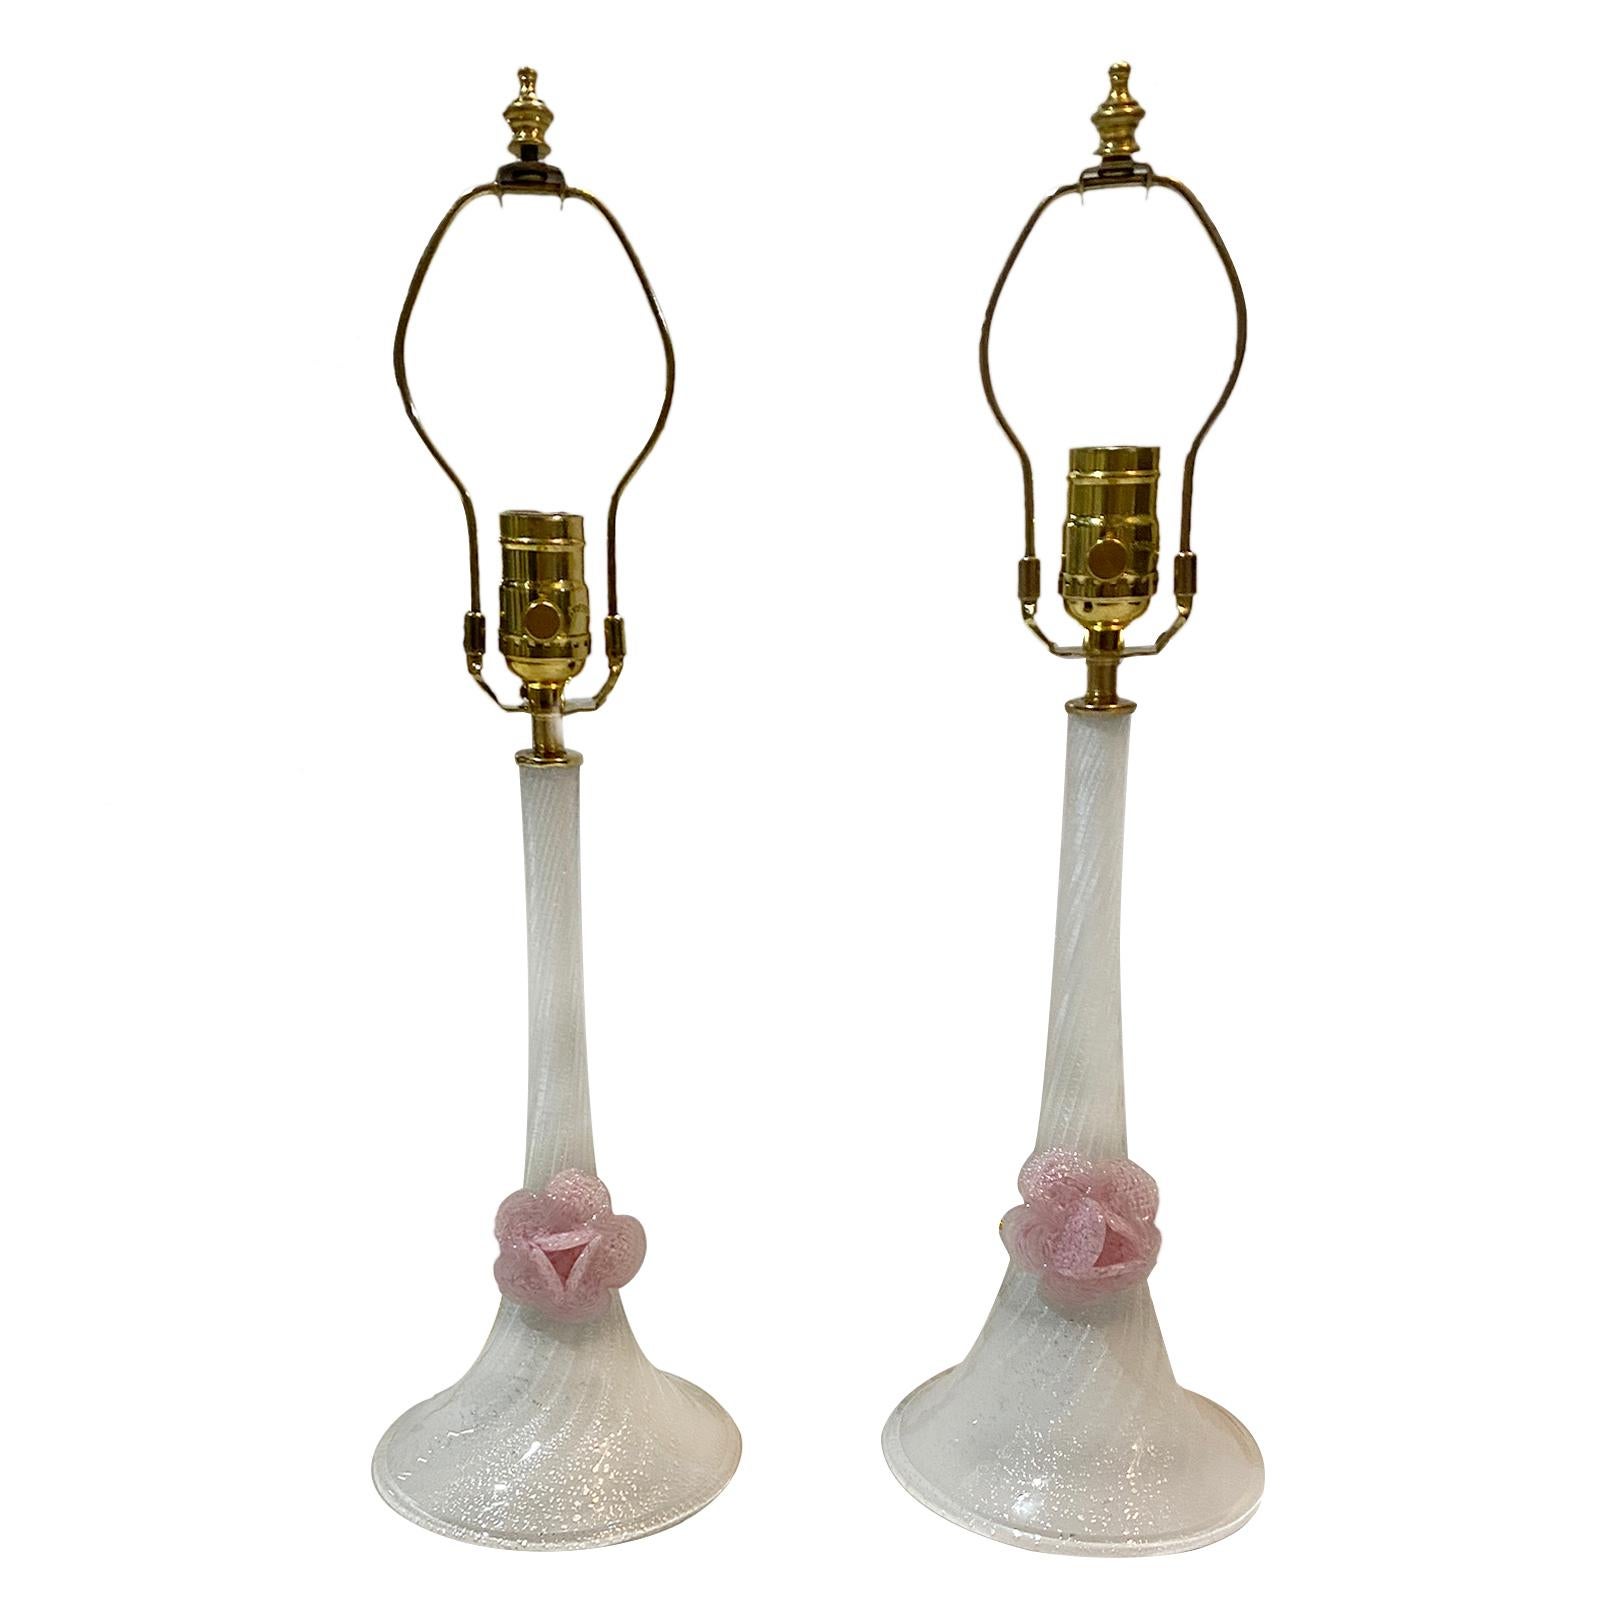 A pair of circa 1960's Italian hand-blown Murano glass table lamps in white with floral motif.

Measurements:
Height of body: 12.25